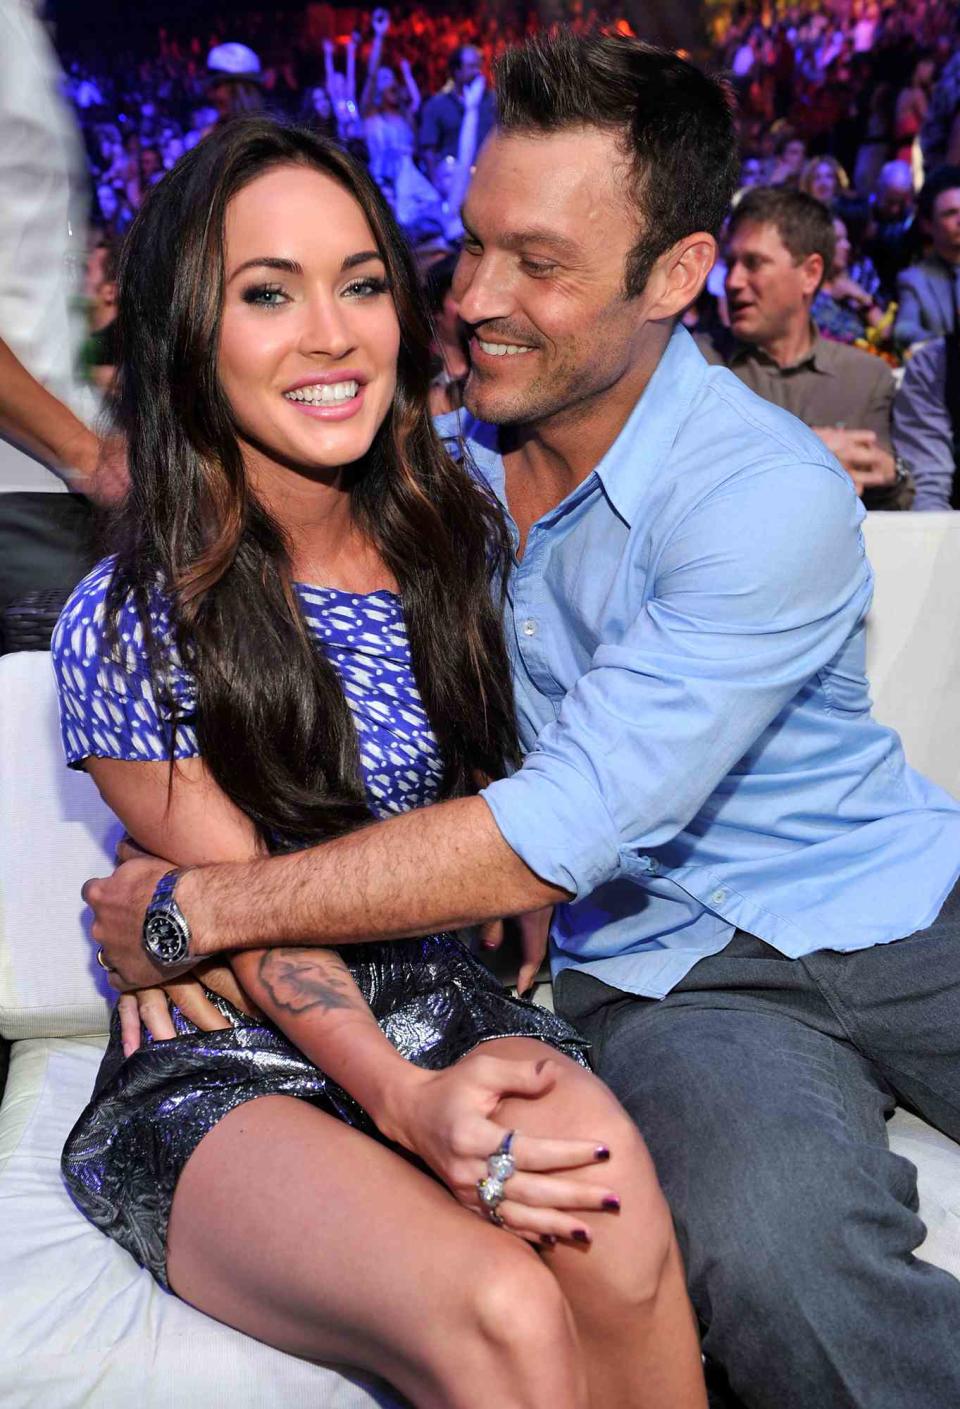 Megan Fox and actor Brian Austin Green attend the 2010 Teen Choice Awards at Gibson Amphitheatre on August 8, 2010 in Universal City, California